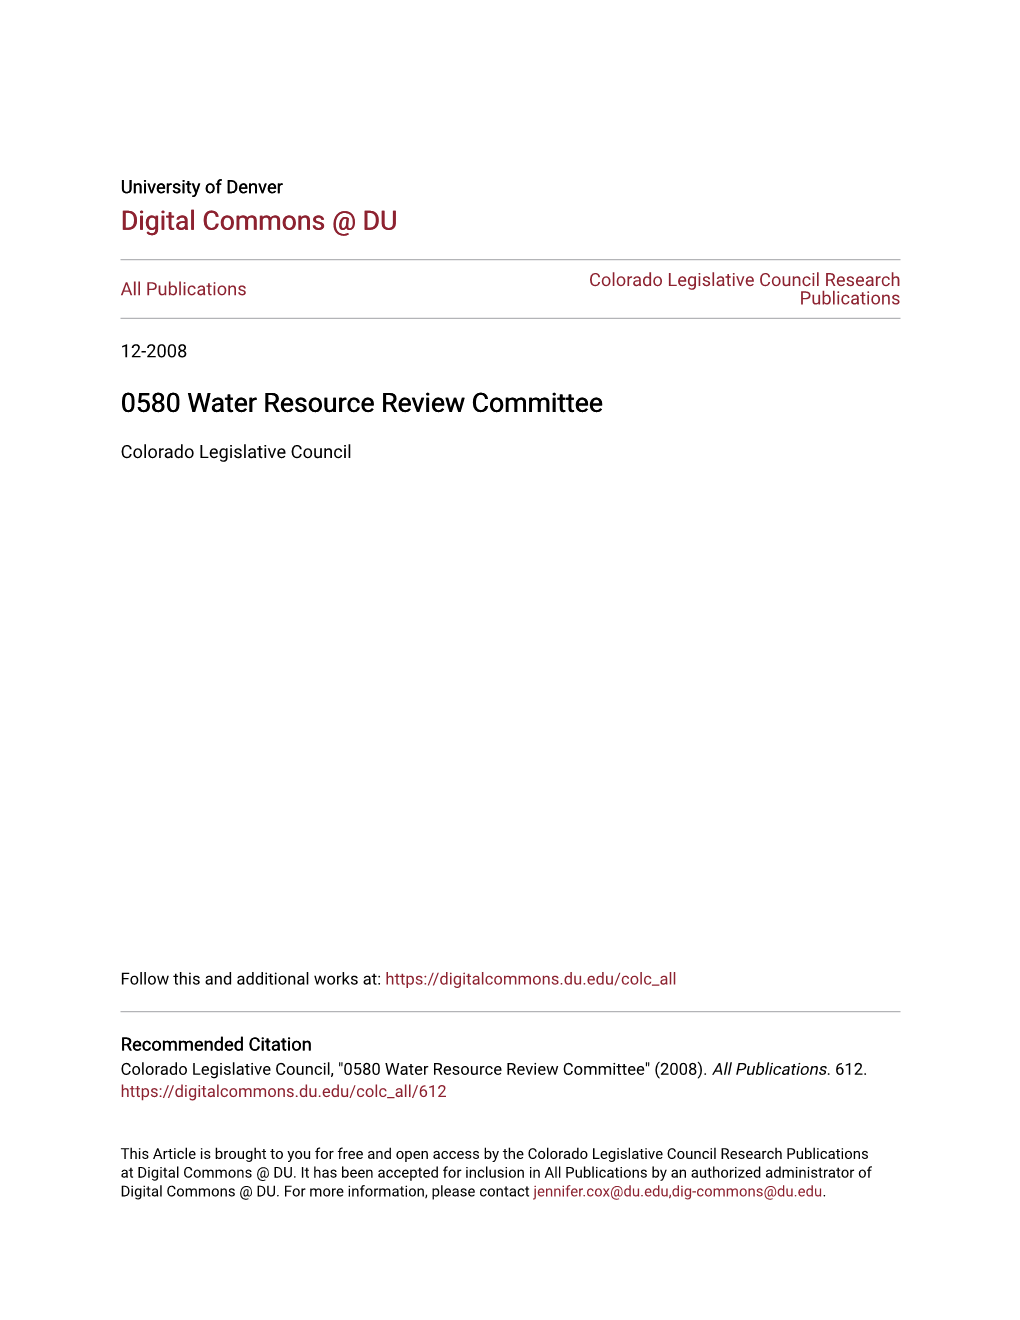 0580 Water Resource Review Committee